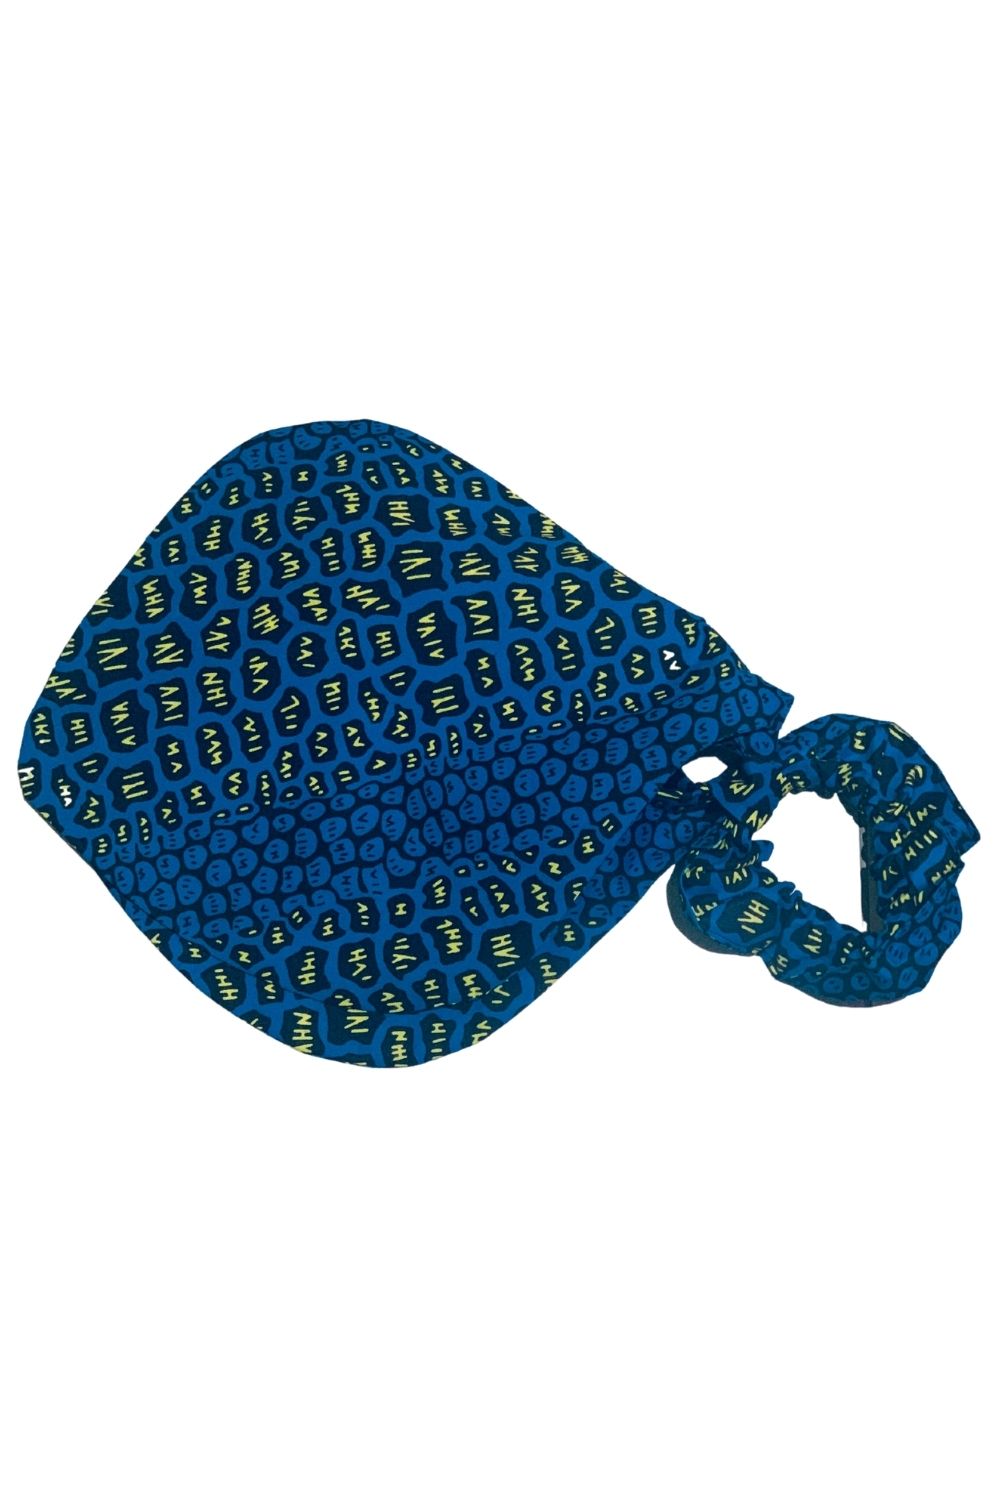 LAST IN STOCK - Phoebe Scrunchie with Oversize Bow in Blue Reptilian